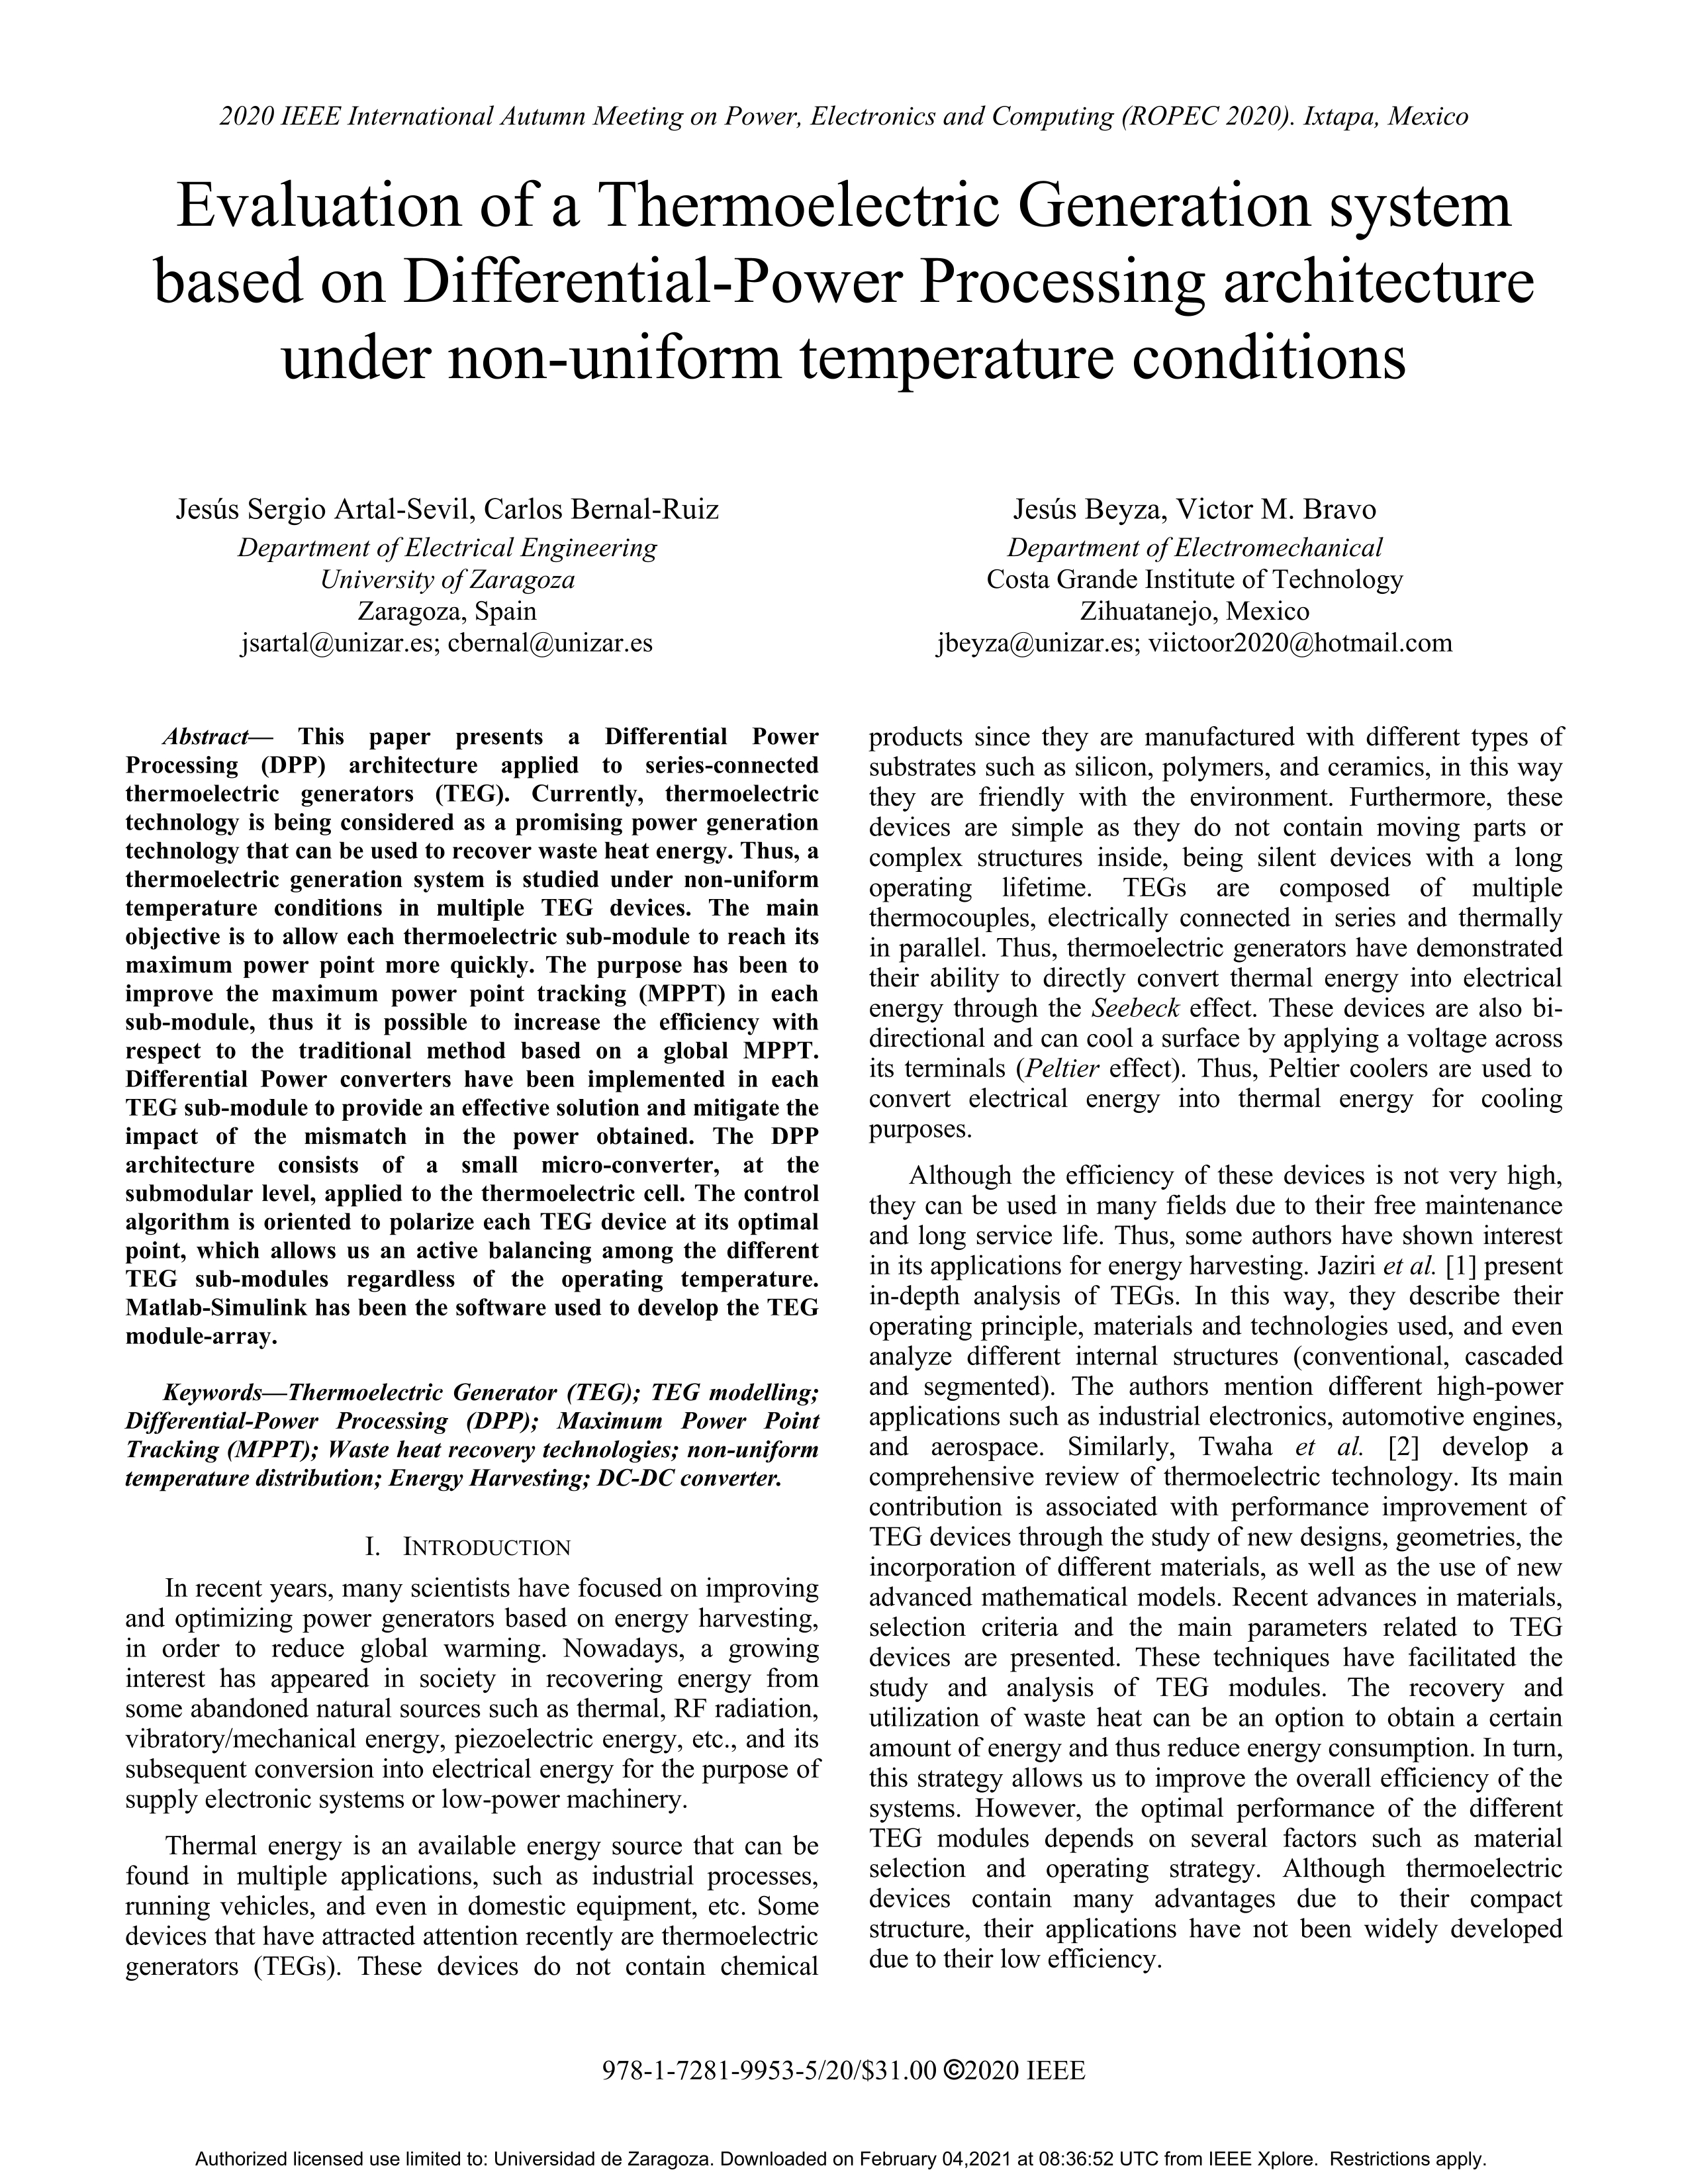 Evaluation of a Thermoelectric Generation system based on Differential-Power Processing architecture under non-uniform temperature conditions